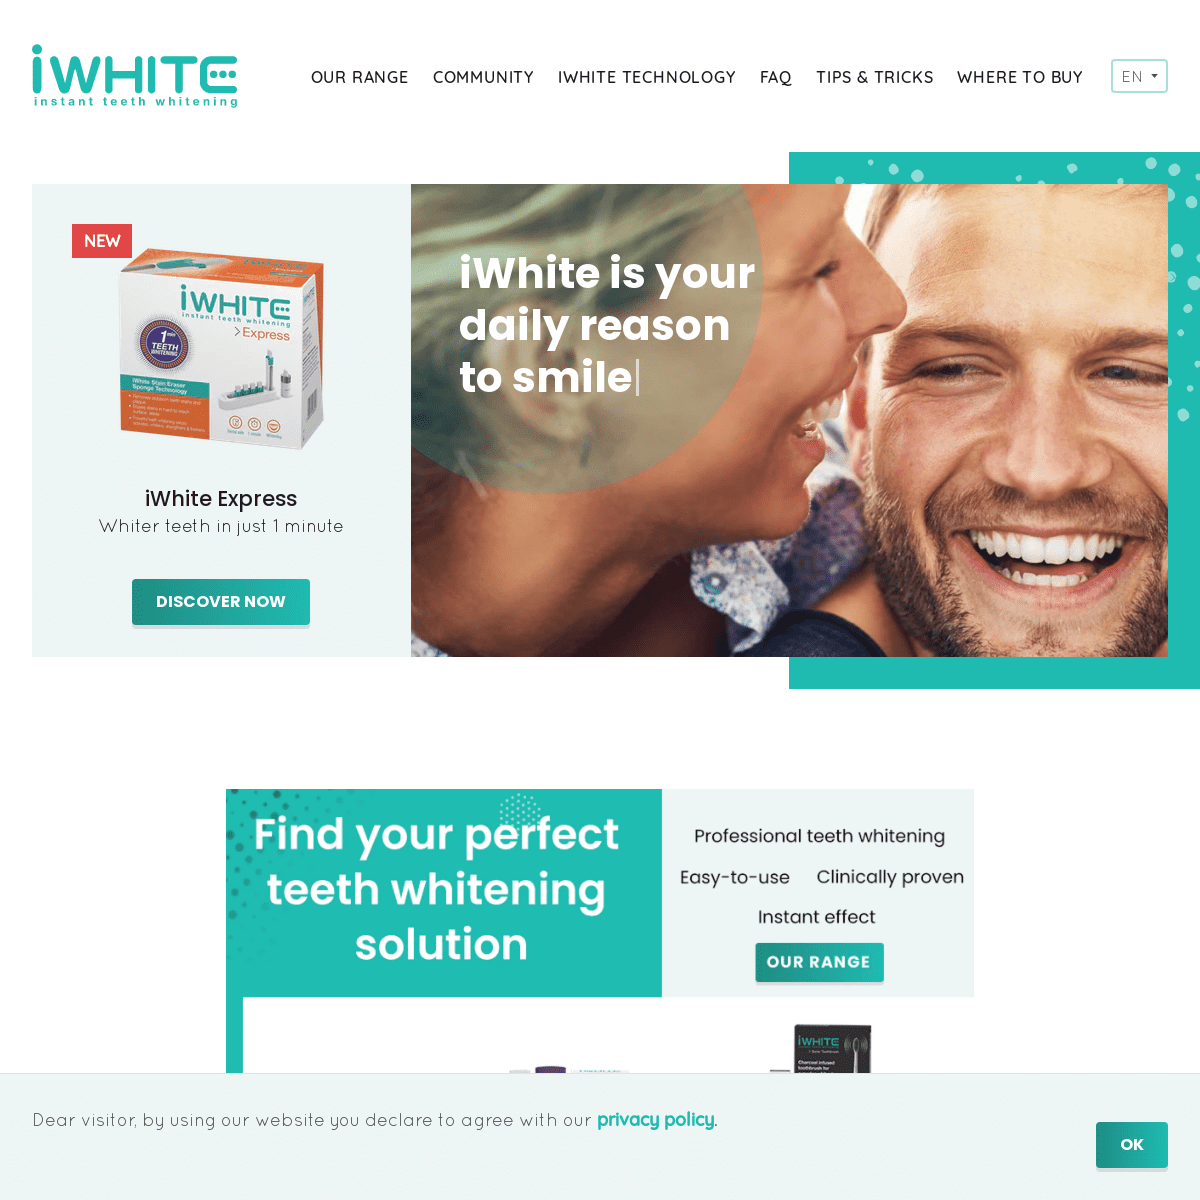 A complete backup of iwhiteinstant.com